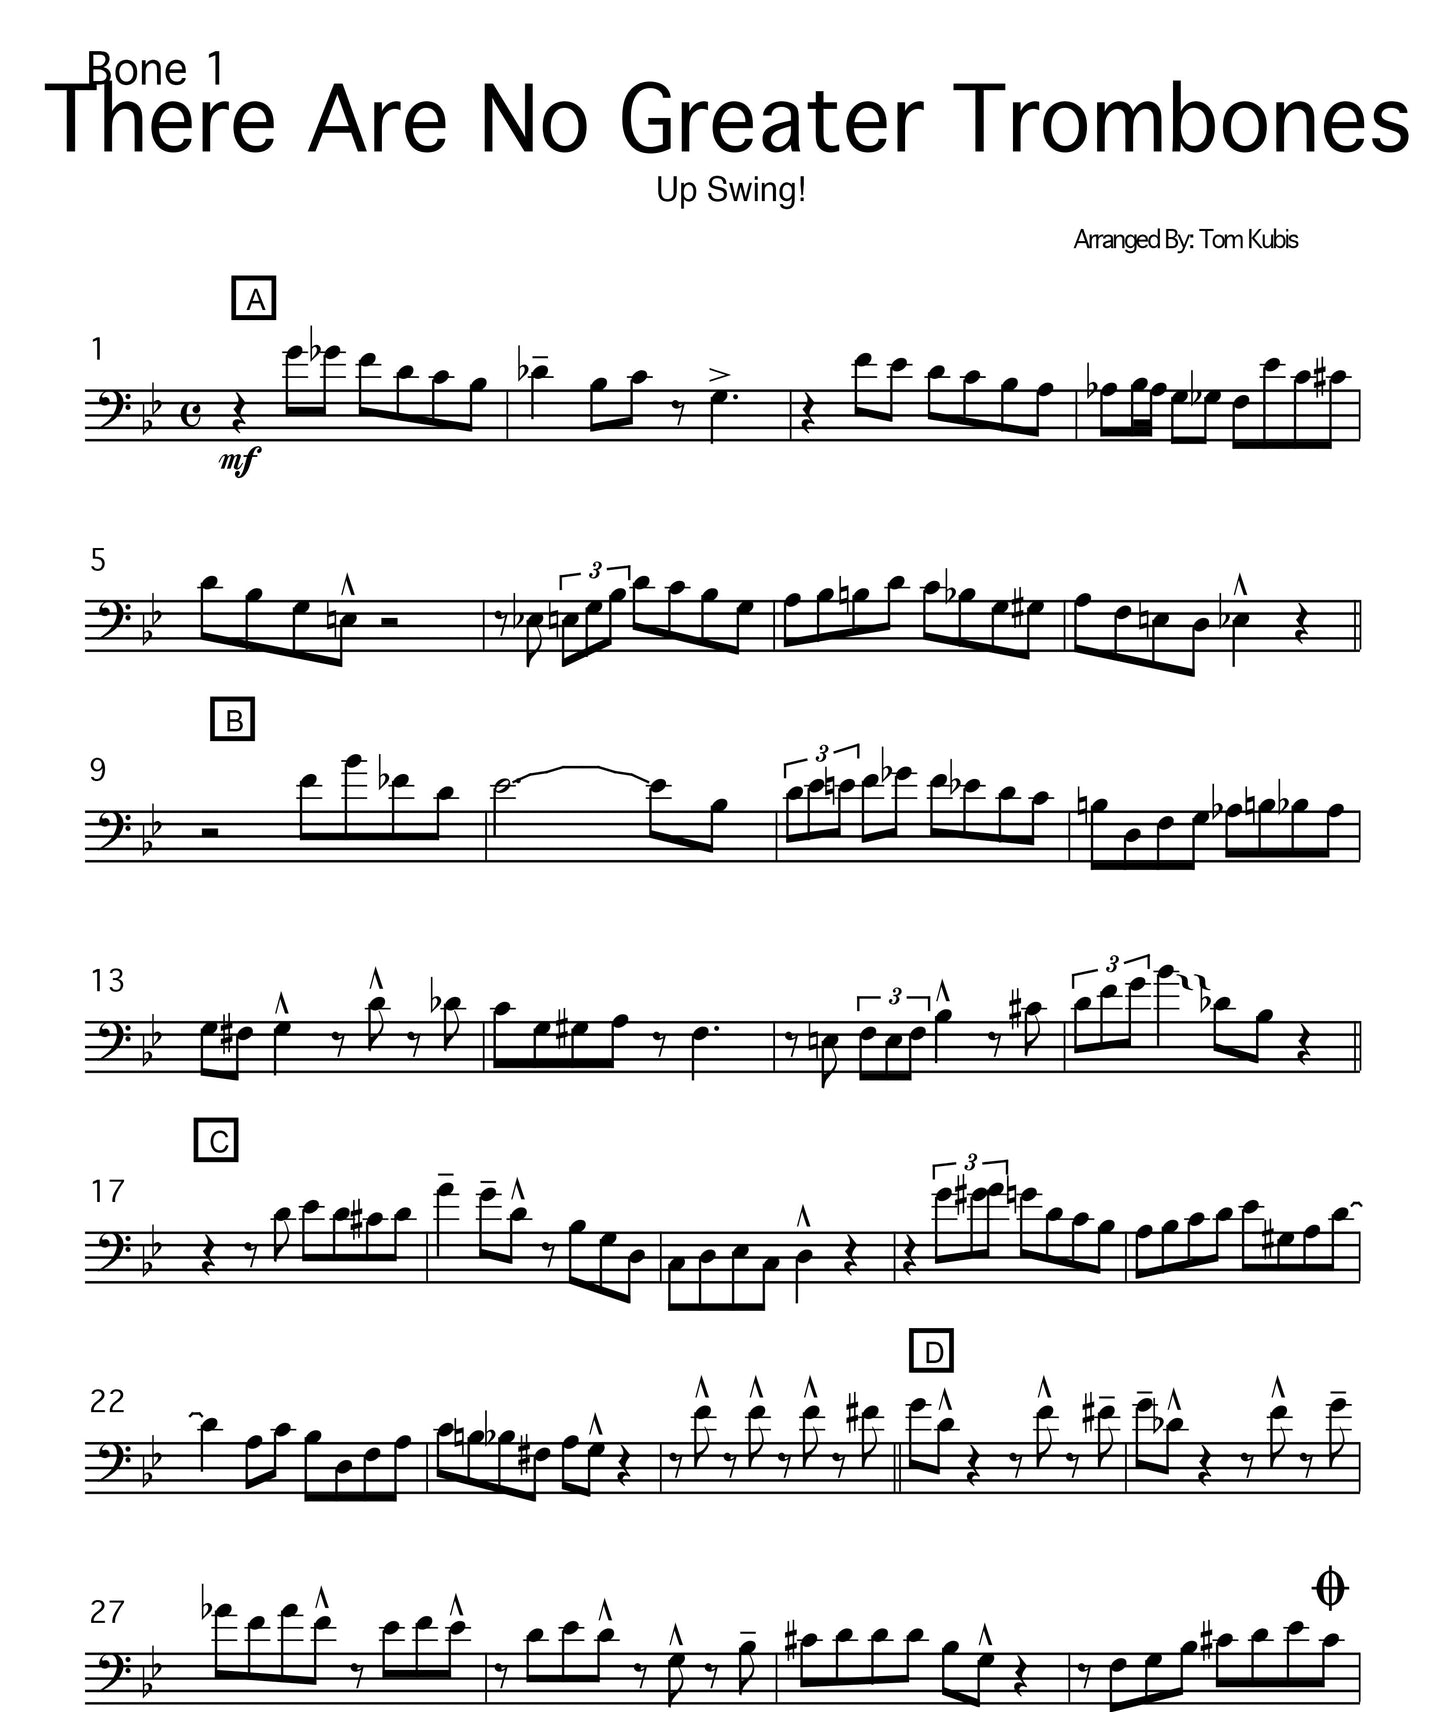 There Are No Greater Trombones